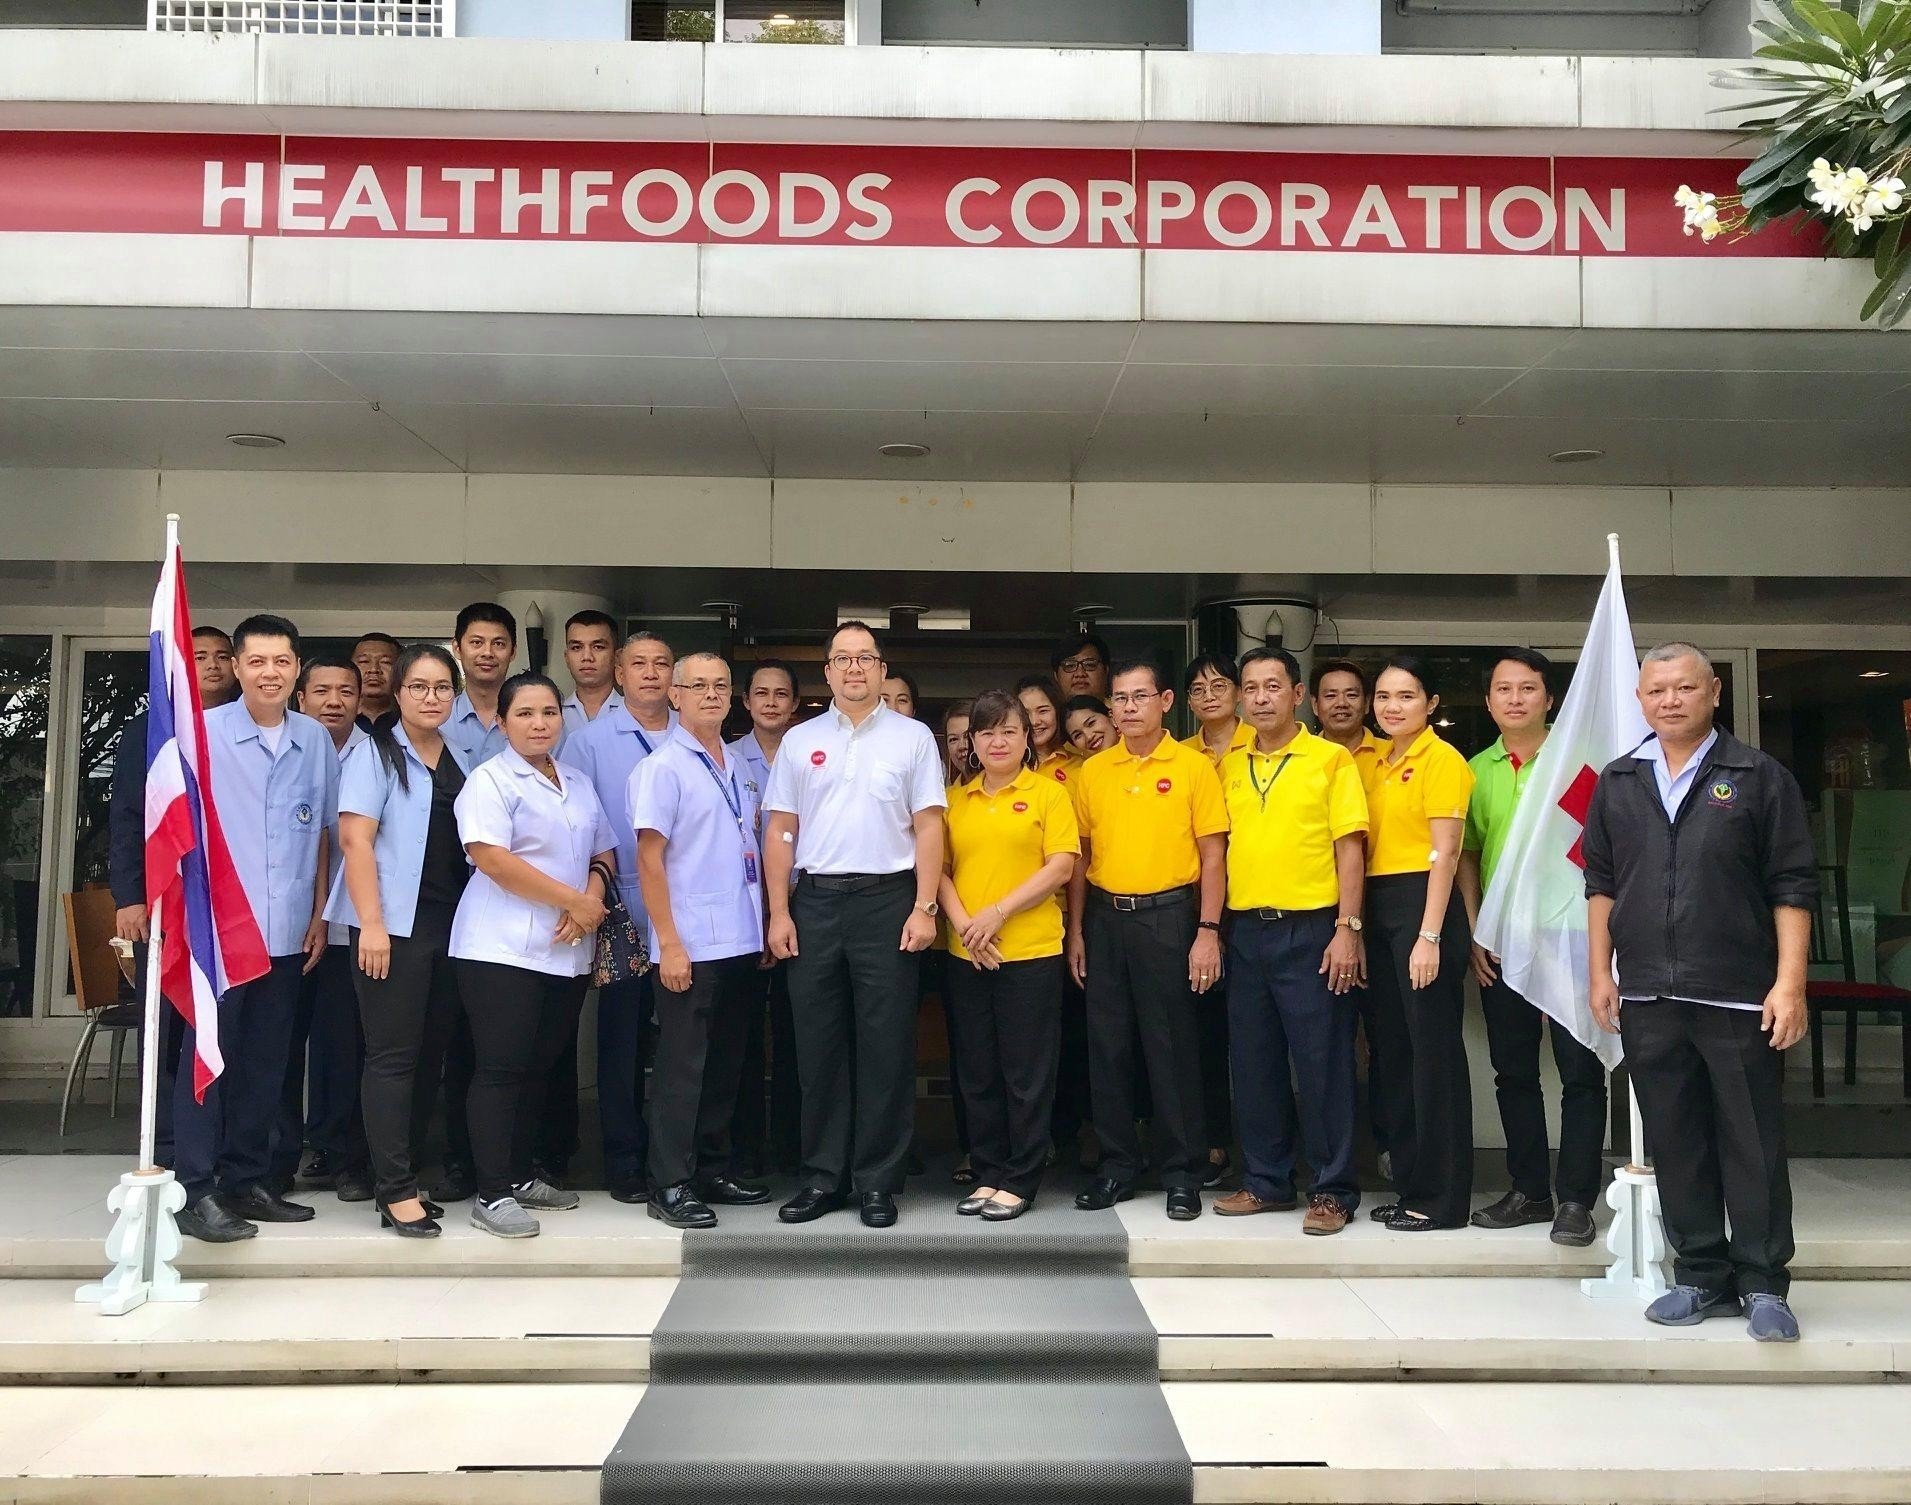 "We Share" Project: Blood Donation in collaboration with the Blood Service Division of Phumiphol Adulyadej Hospital, Thai Red Cross Society.